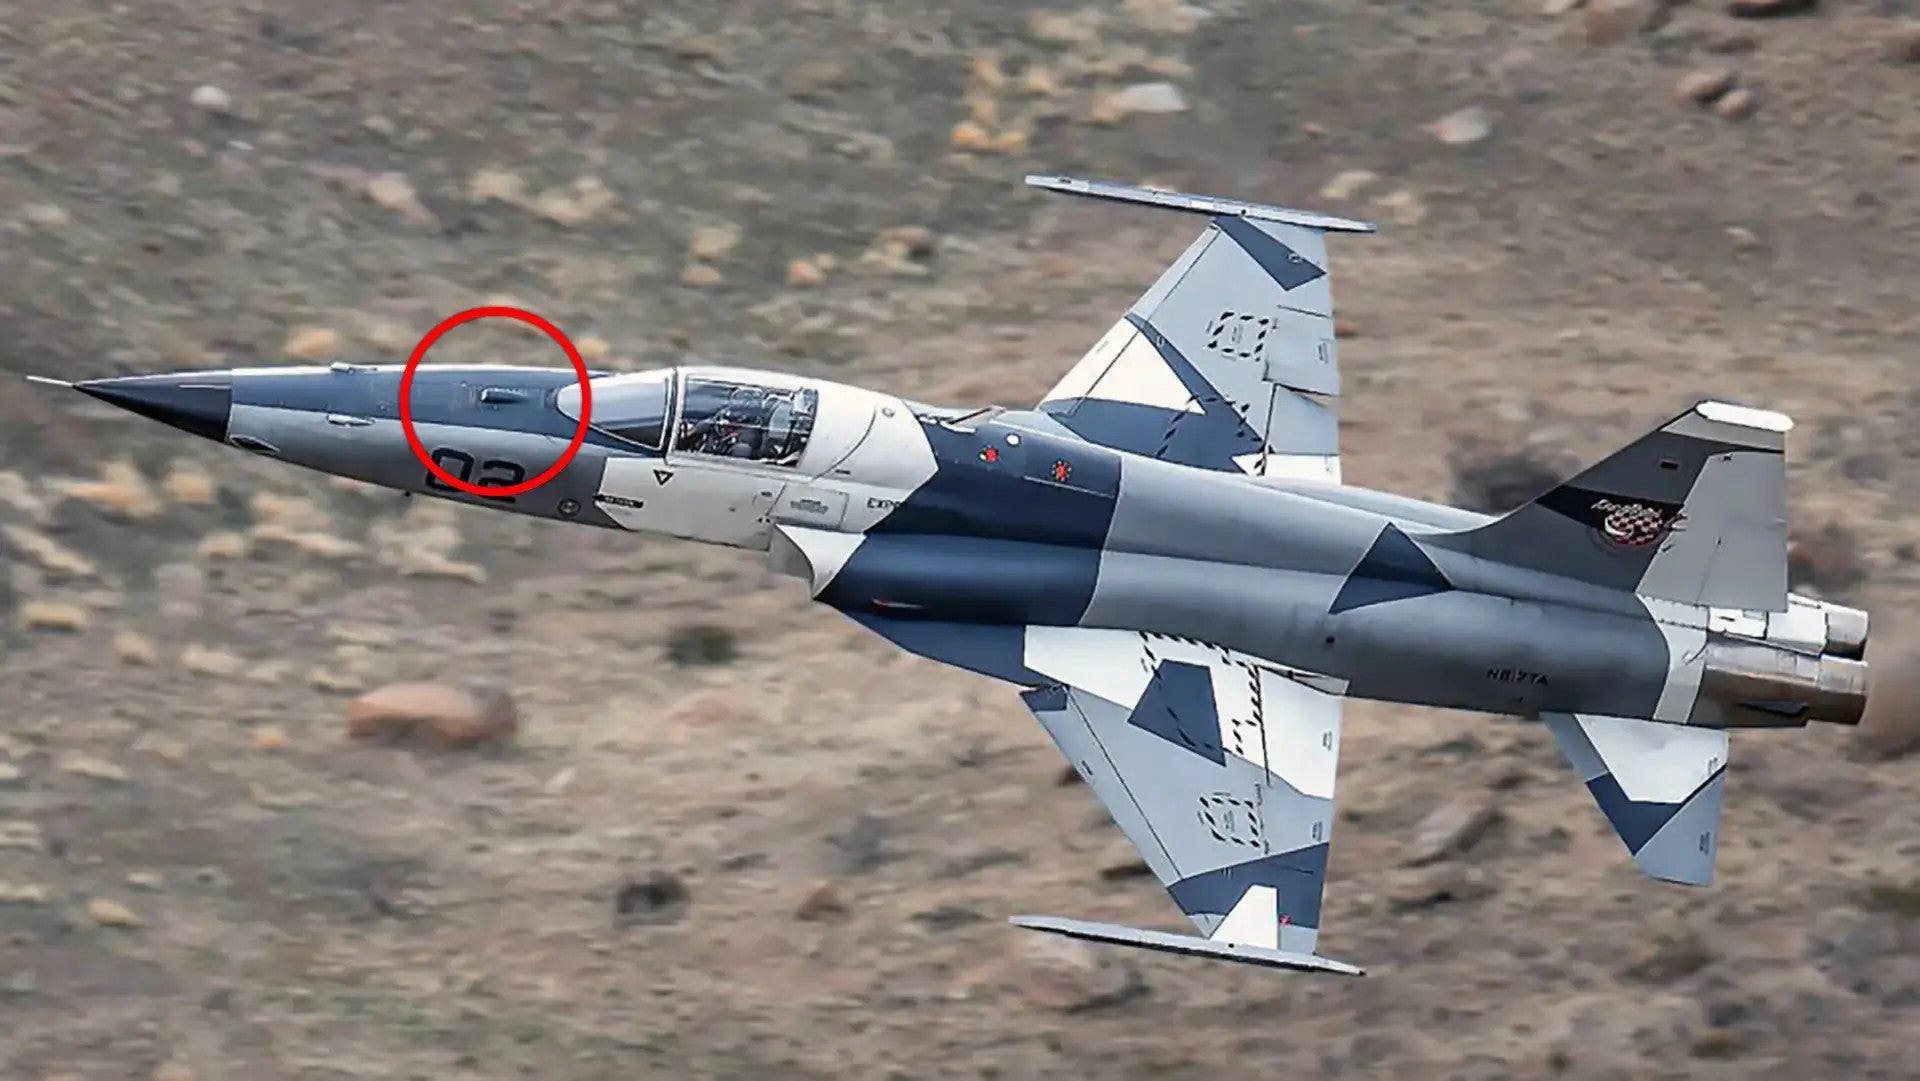 A picture Tactical Air Support released in October of its F-5AT jets fitted with the TacIRST sensor in the nose, which is highlighted in the red circle. TacAir 